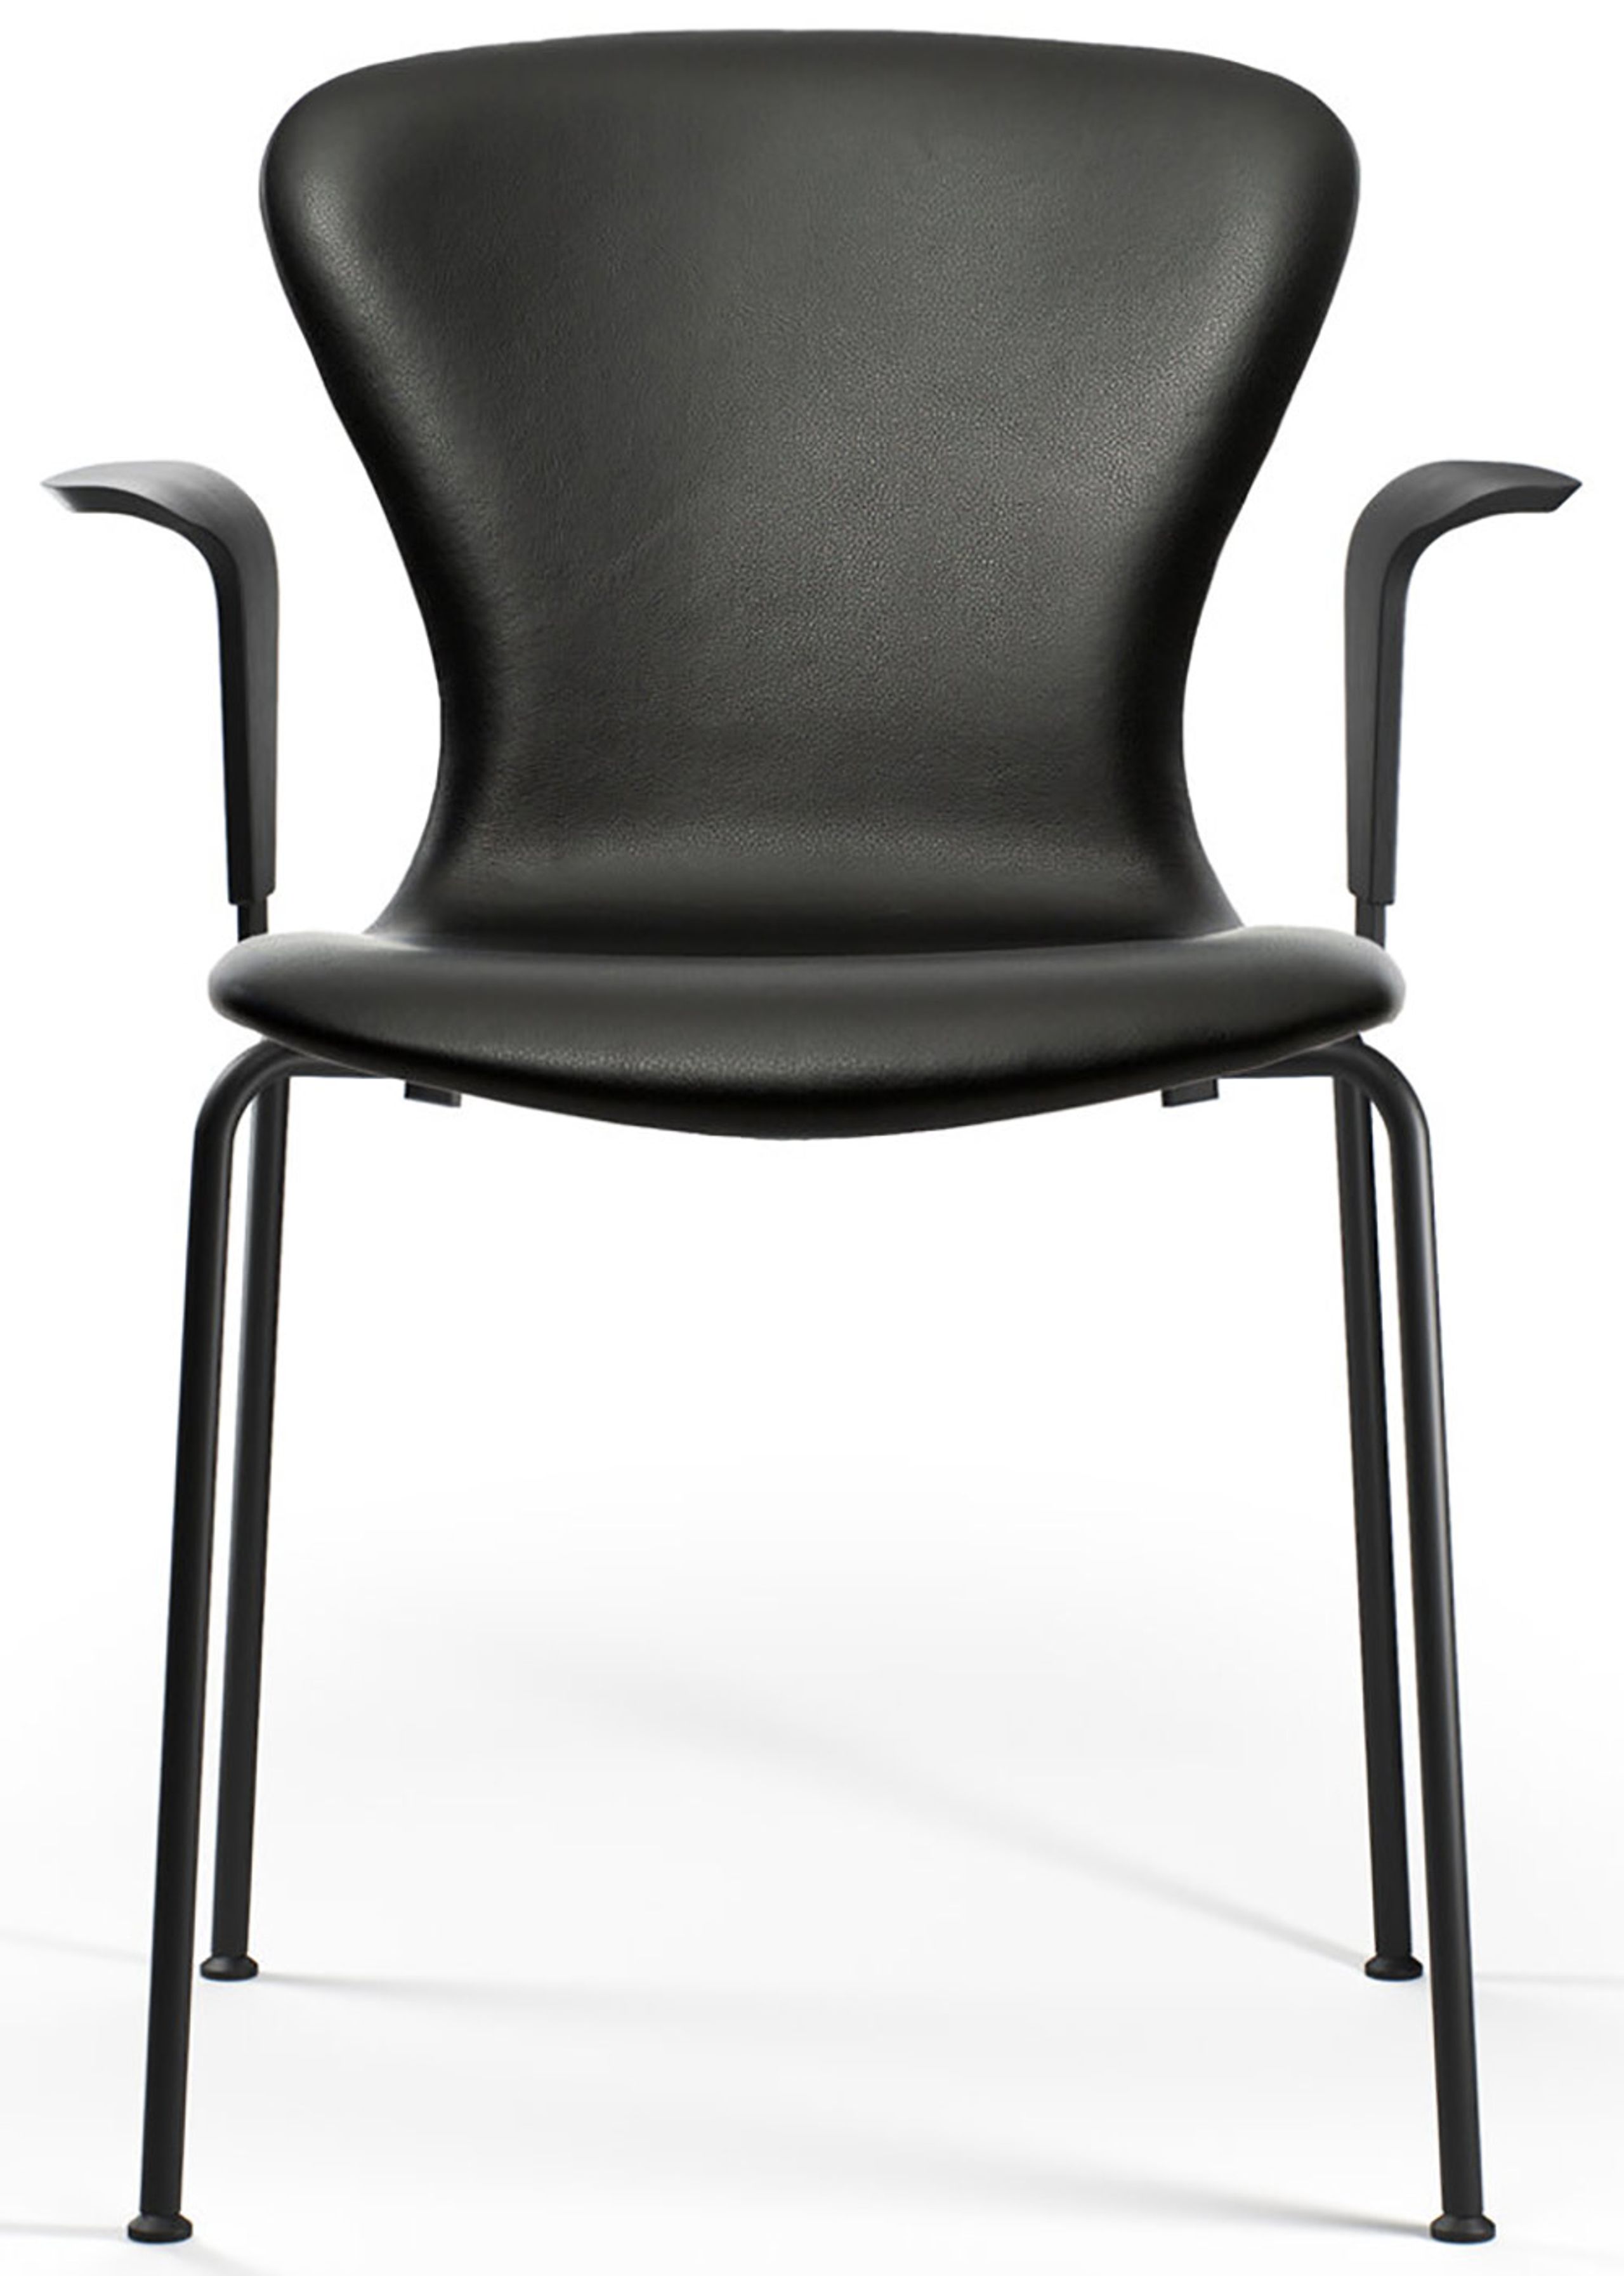 Bruunmunch - Chaise - PLAY arm chair Tube - Fully Upholstered: Black Hero Leather